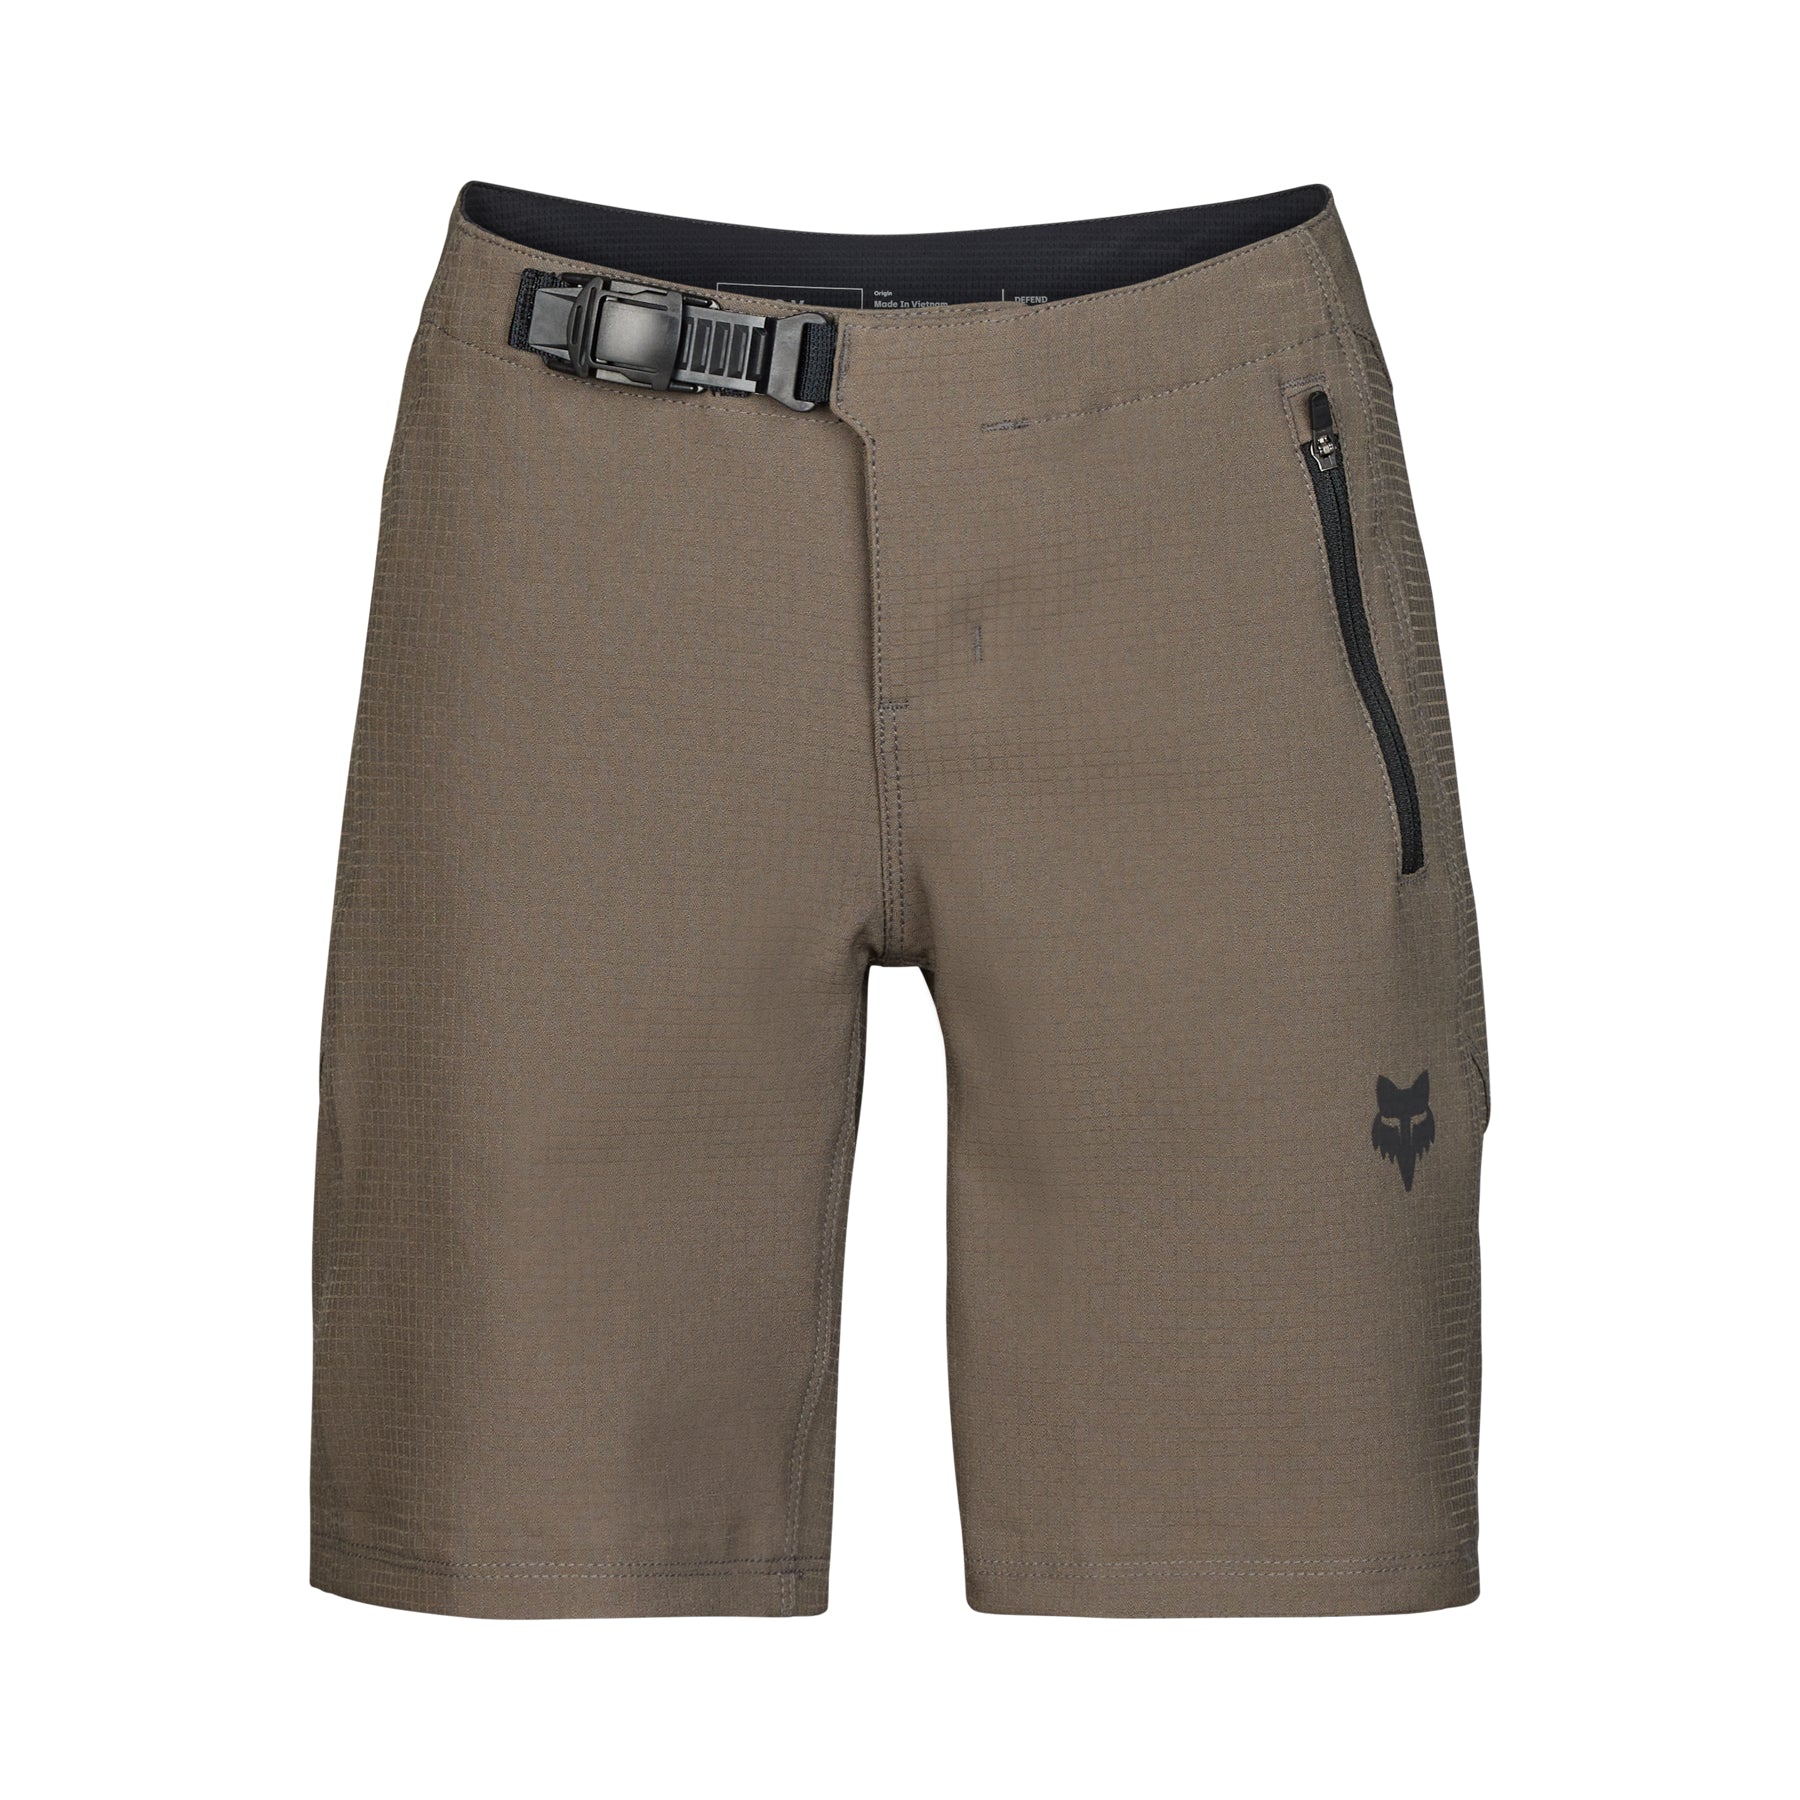 Fox Defend Youth Shorts - Youth L-26 - Dirt - Image 1